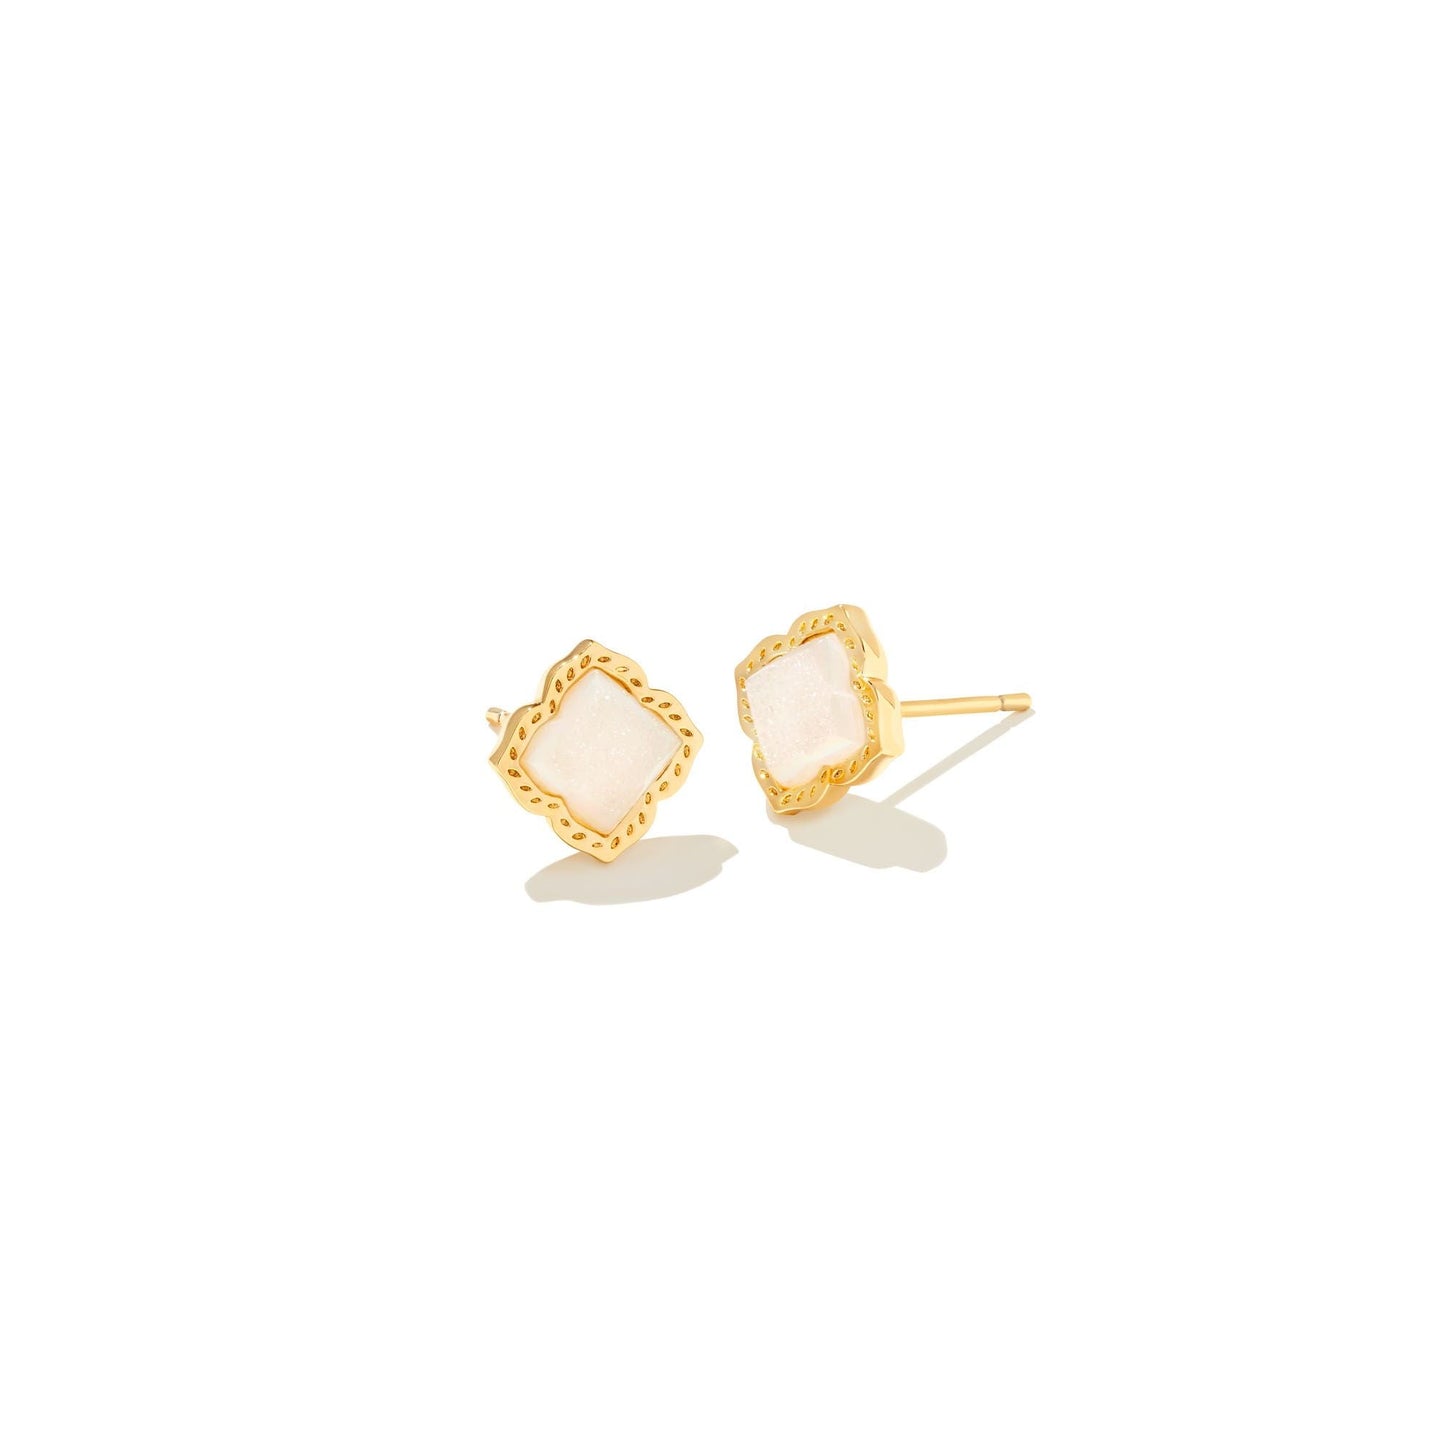 Mallory Stud Earrings in Gold Iridescent Drusy